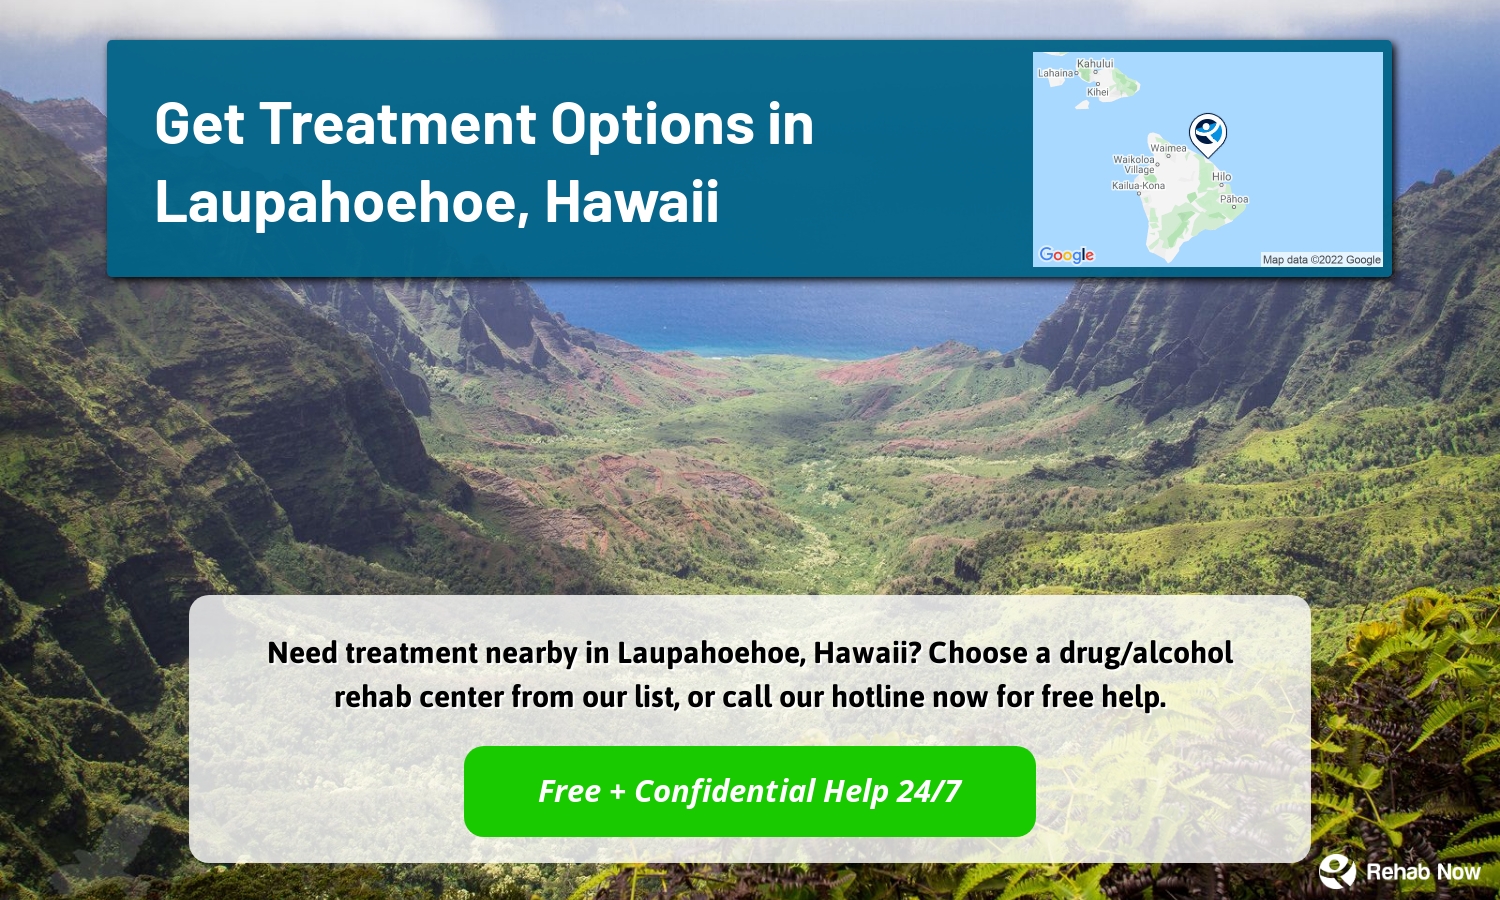 Need treatment nearby in Laupahoehoe, Hawaii? Choose a drug/alcohol rehab center from our list, or call our hotline now for free help.